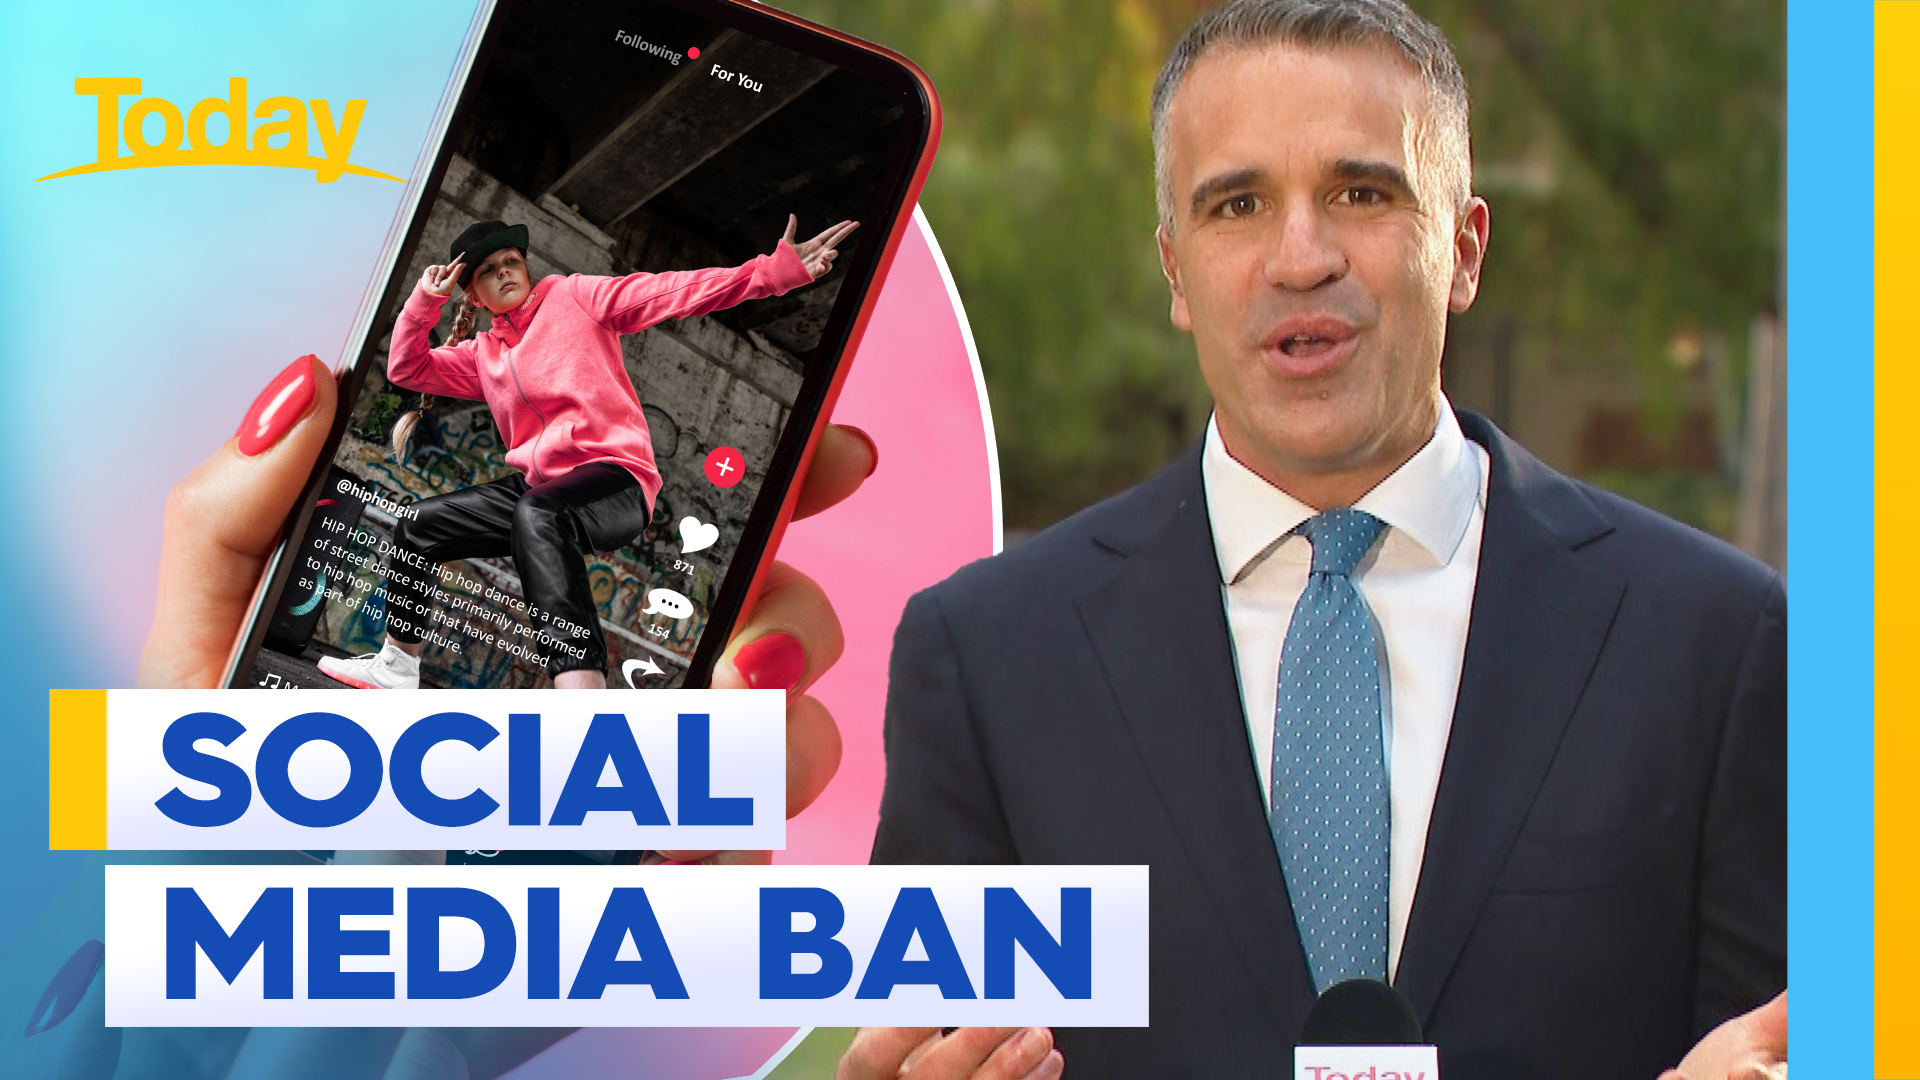 South Australia's plan to ban social media for those under 14